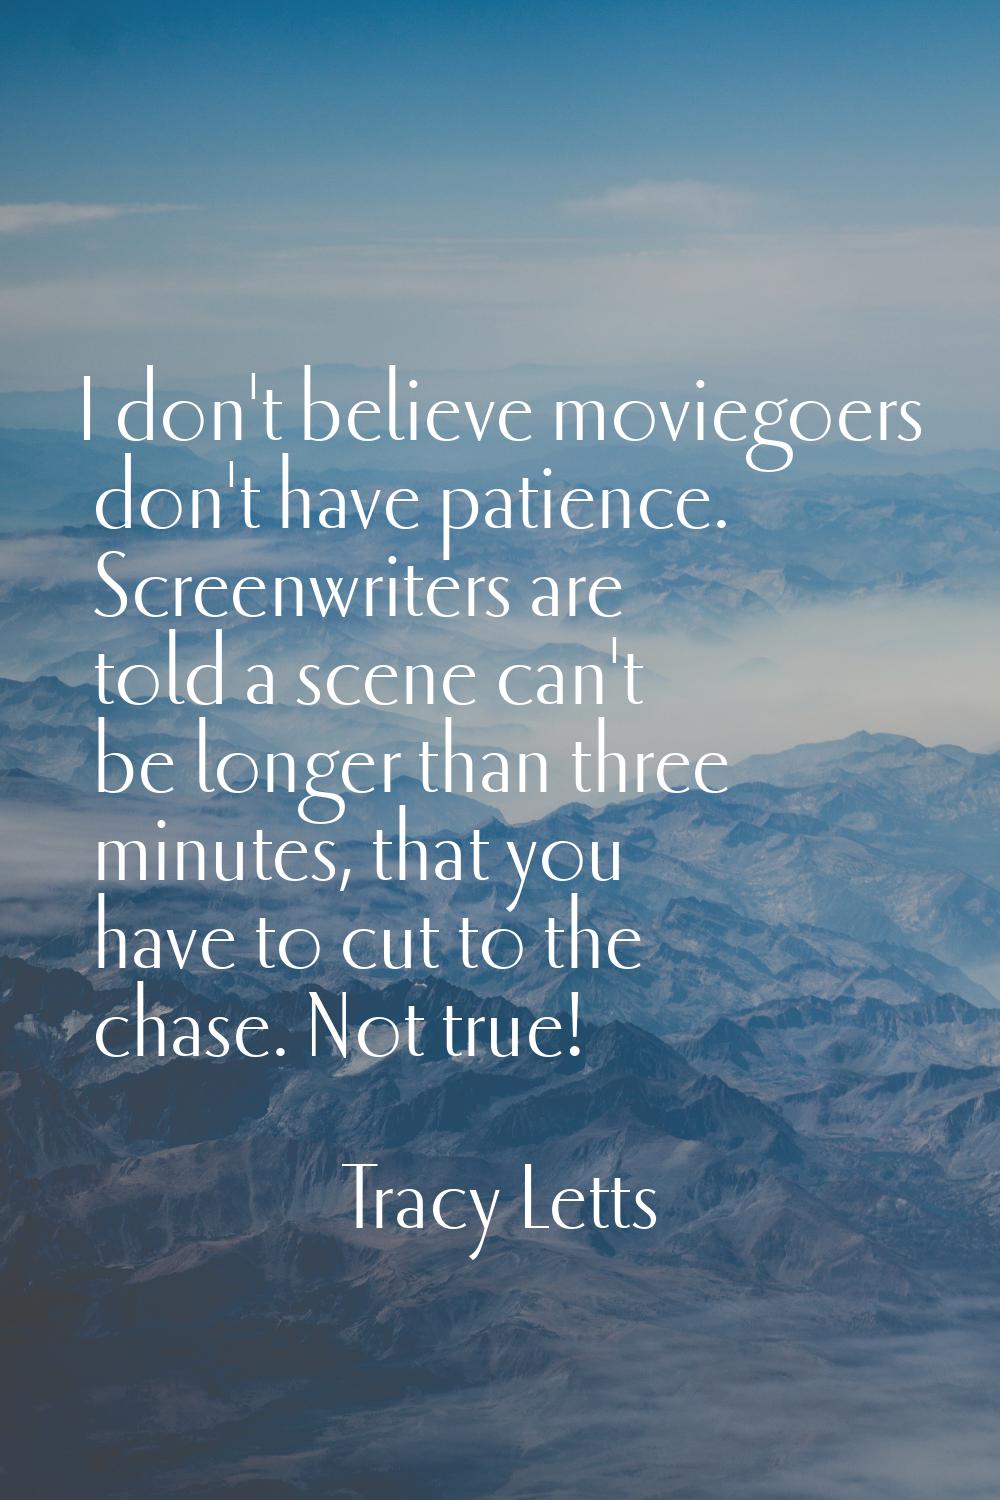 I don't believe moviegoers don't have patience. Screenwriters are told a scene can't be longer than